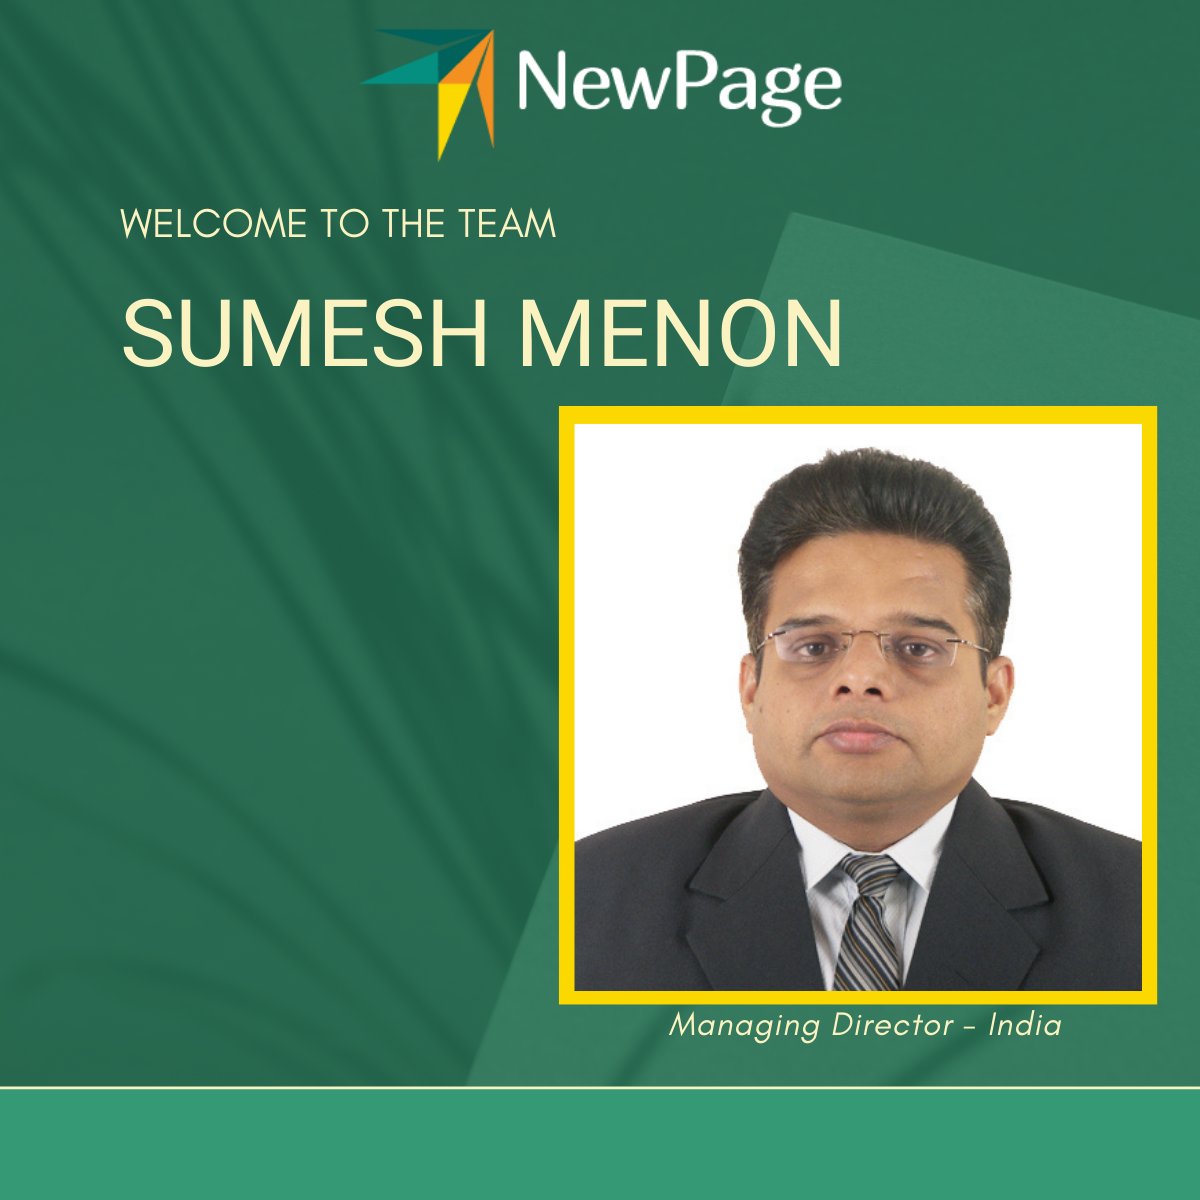 We are thrilled to extend a warm welcome to Sumesh Menon, our new Managing Director - India, at NewPage! 

Sumesh brings with him over 3 decades of unparalleled leadership experience.

Please join us in extending a warm welcome to Sumesh!
#Leadership #digitalhealth #AI